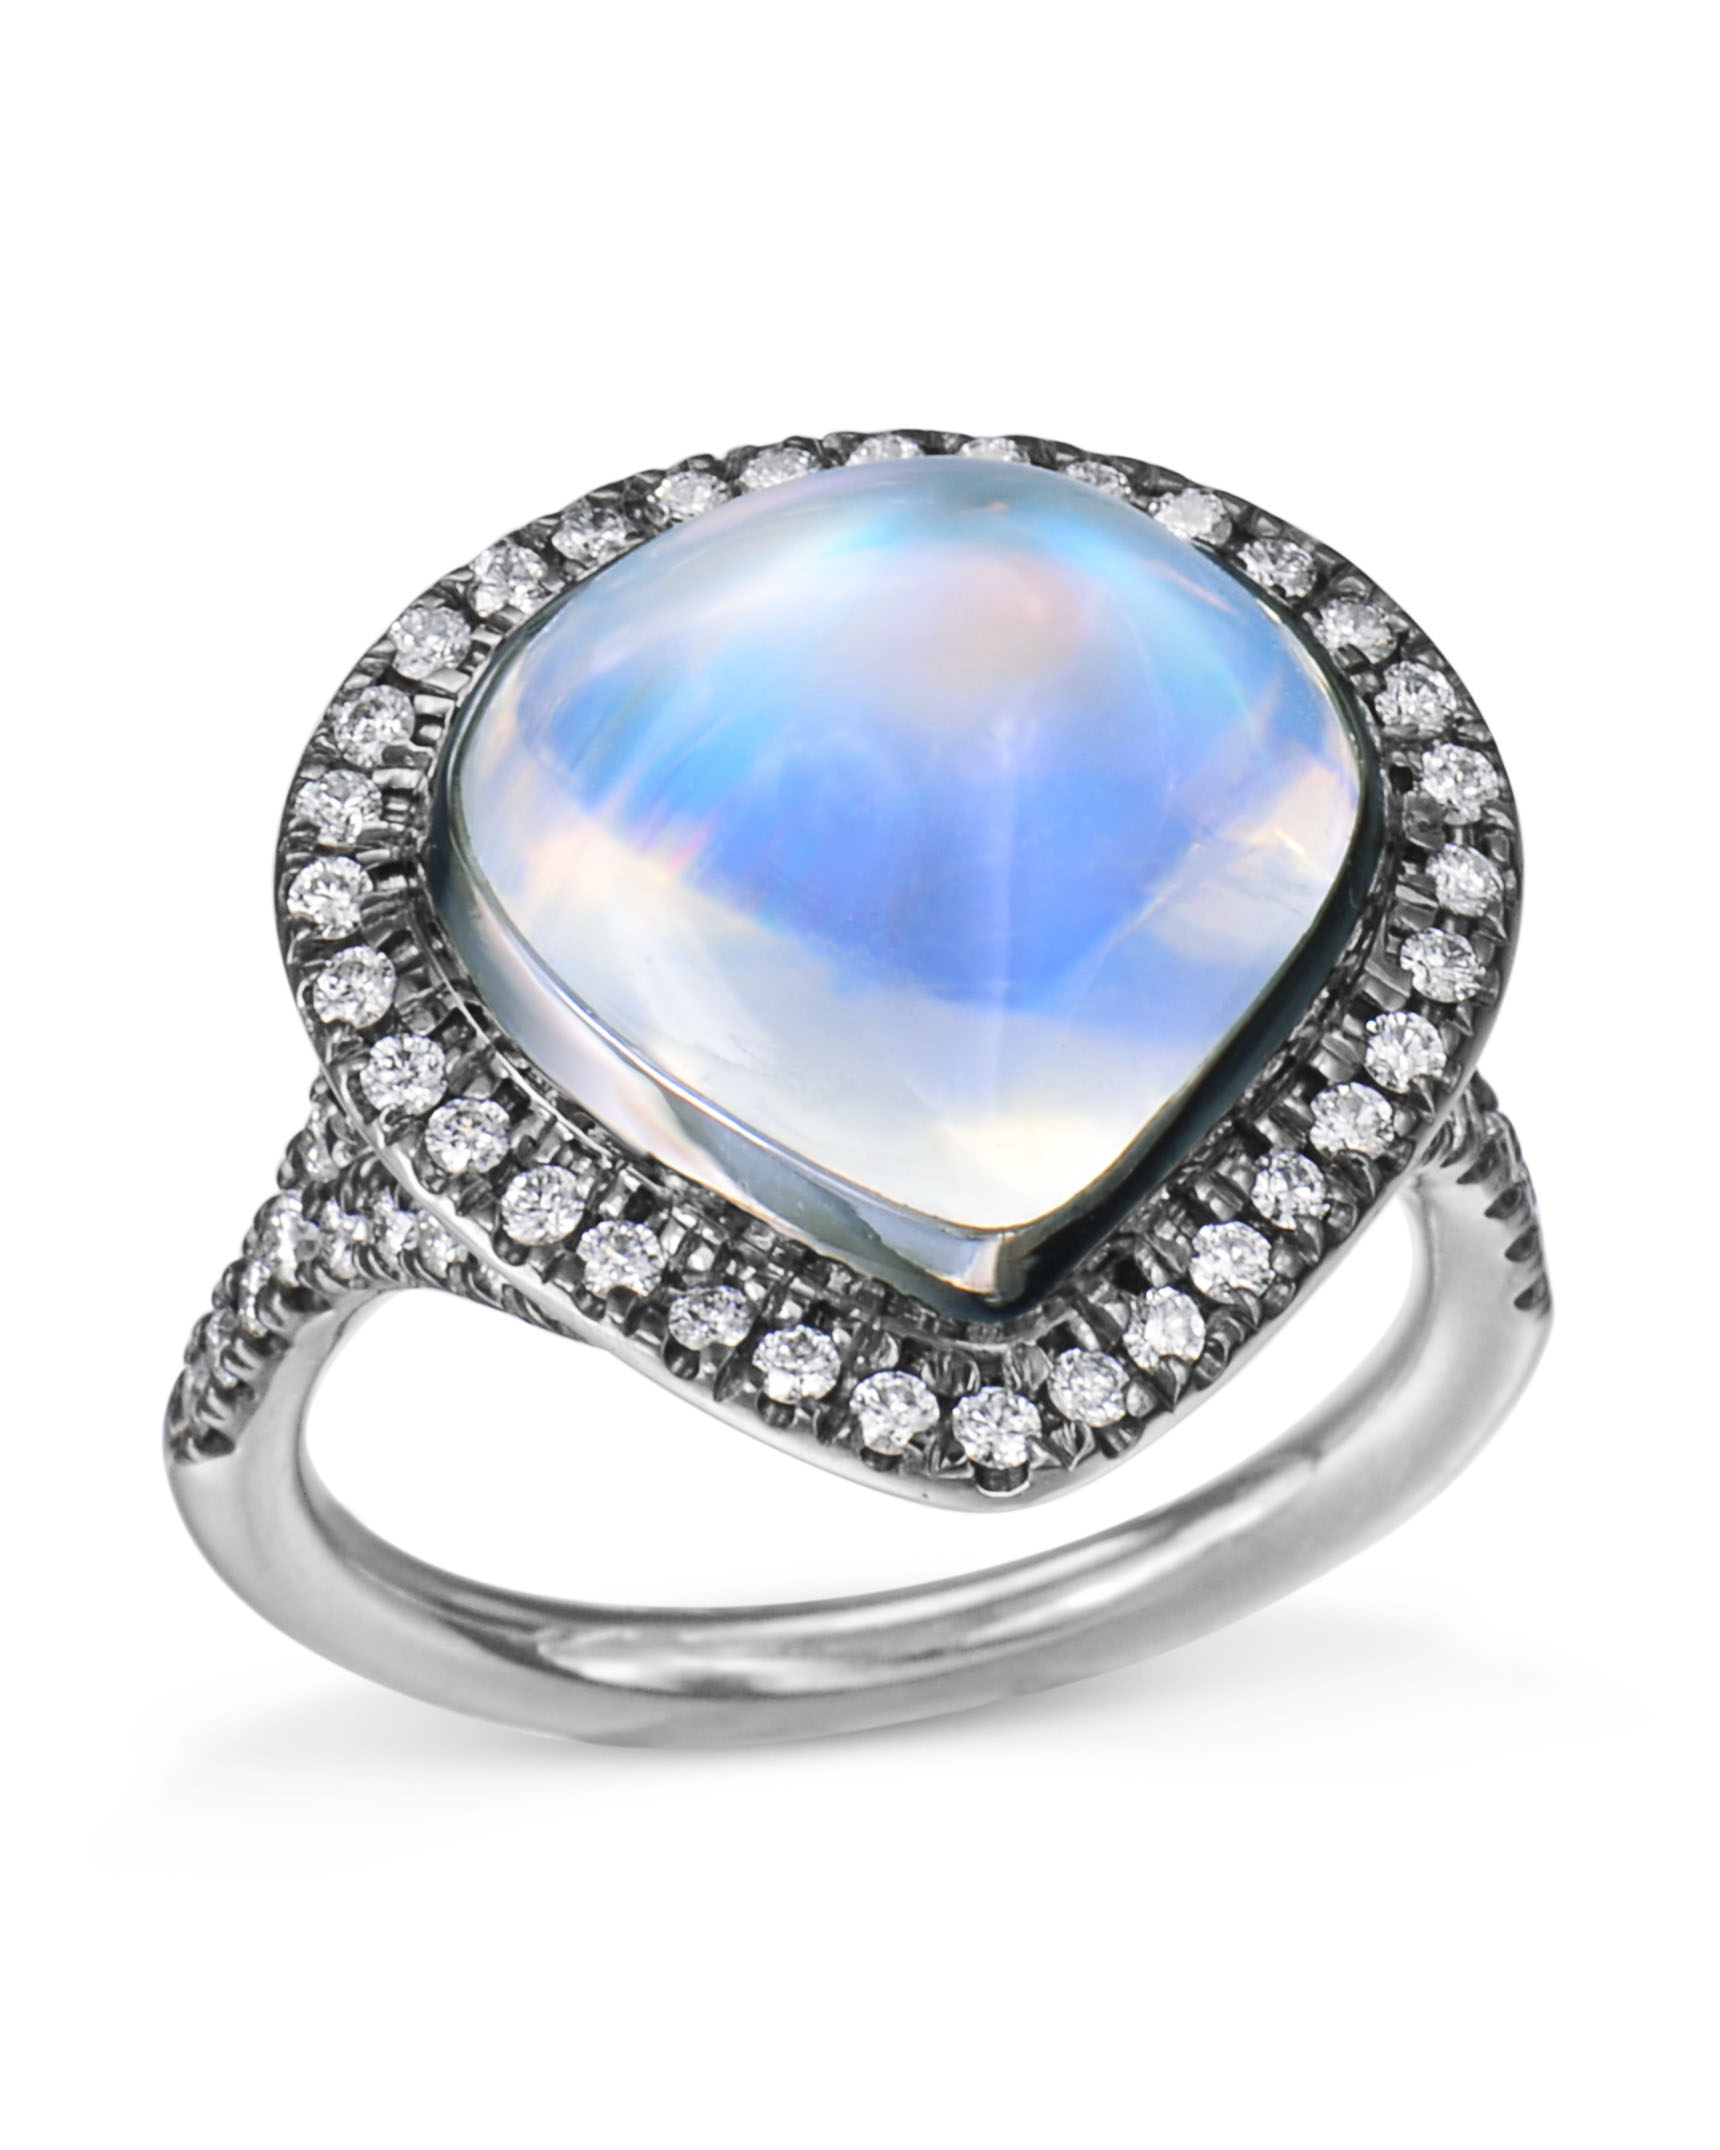 Oval Faceted Blue Rainbow Moonstone Gemstone 925 Sterling Silver Ring  Fashion — Discovered